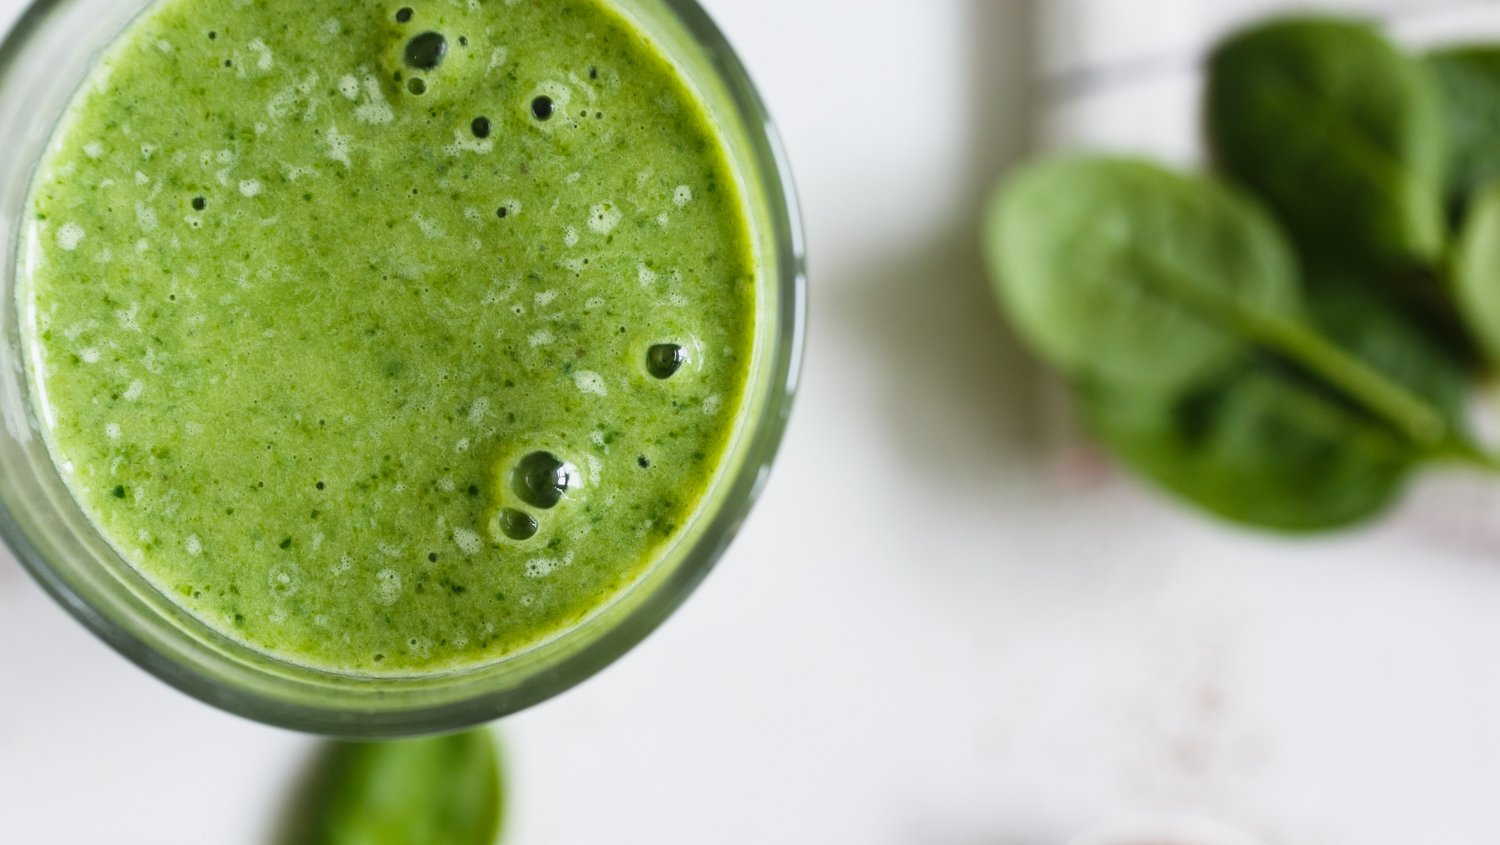 The SWW™ Green Smoothie